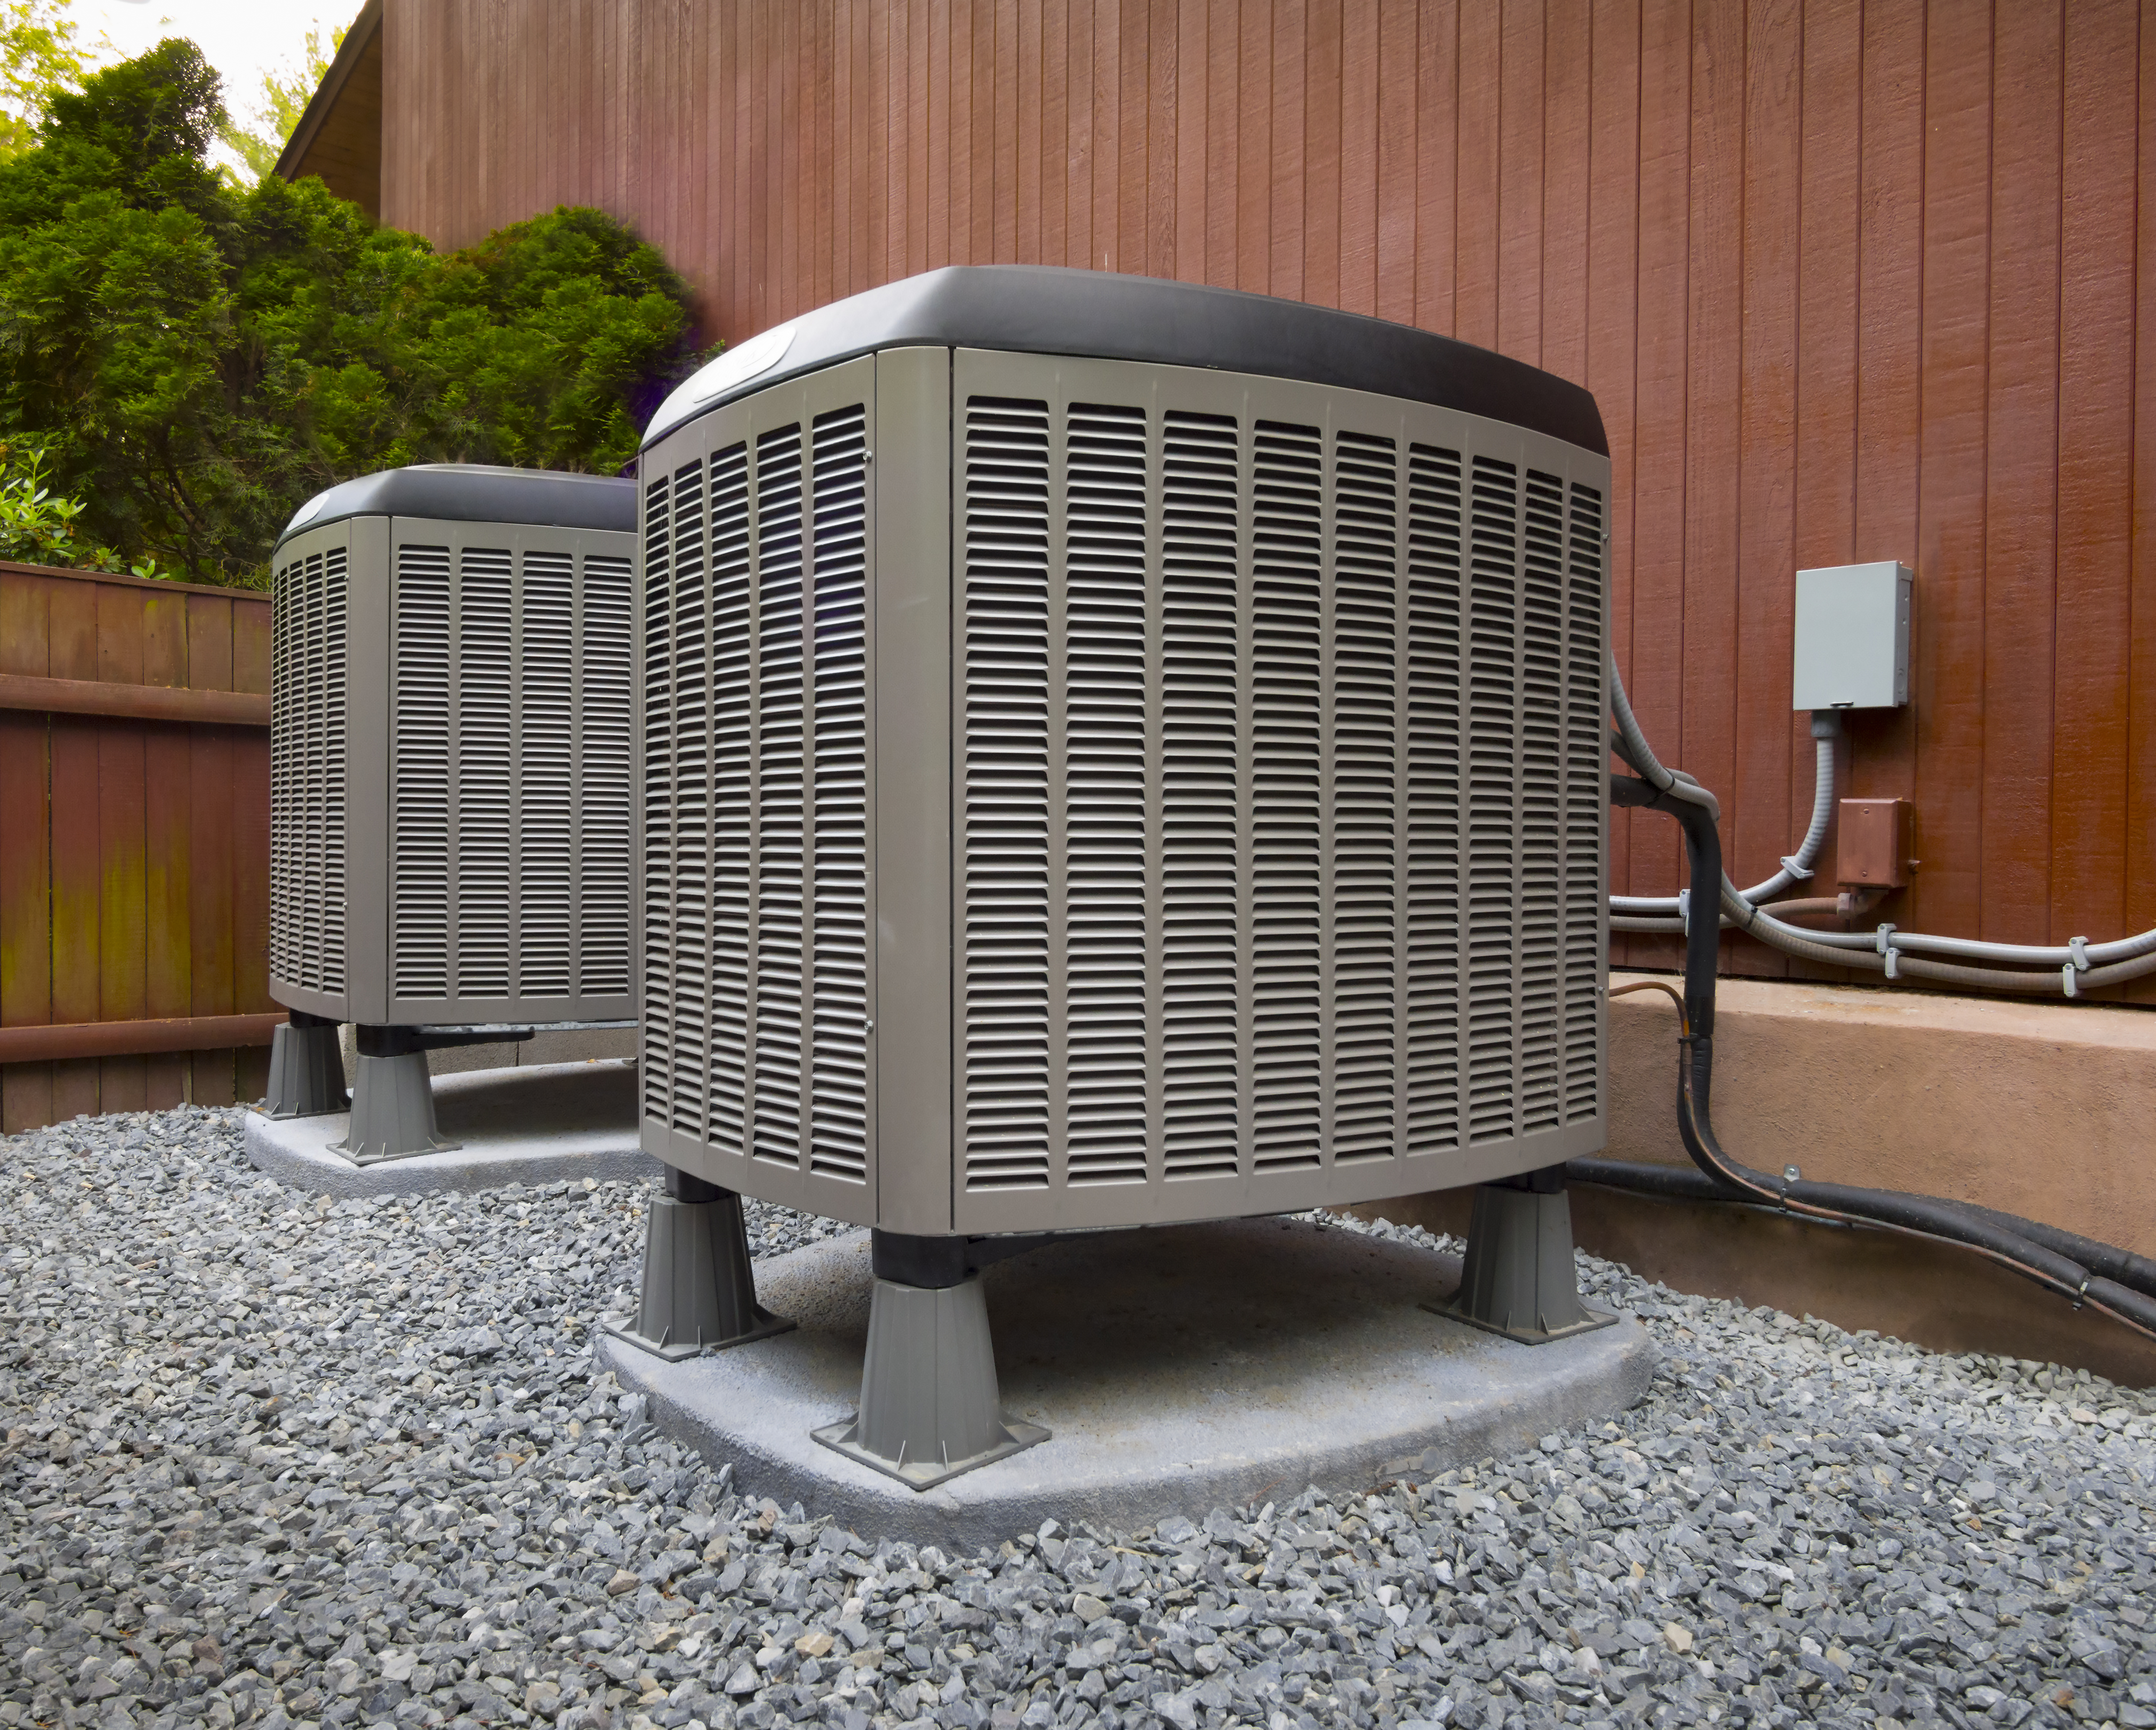 HVAC heating and air conditioning unots